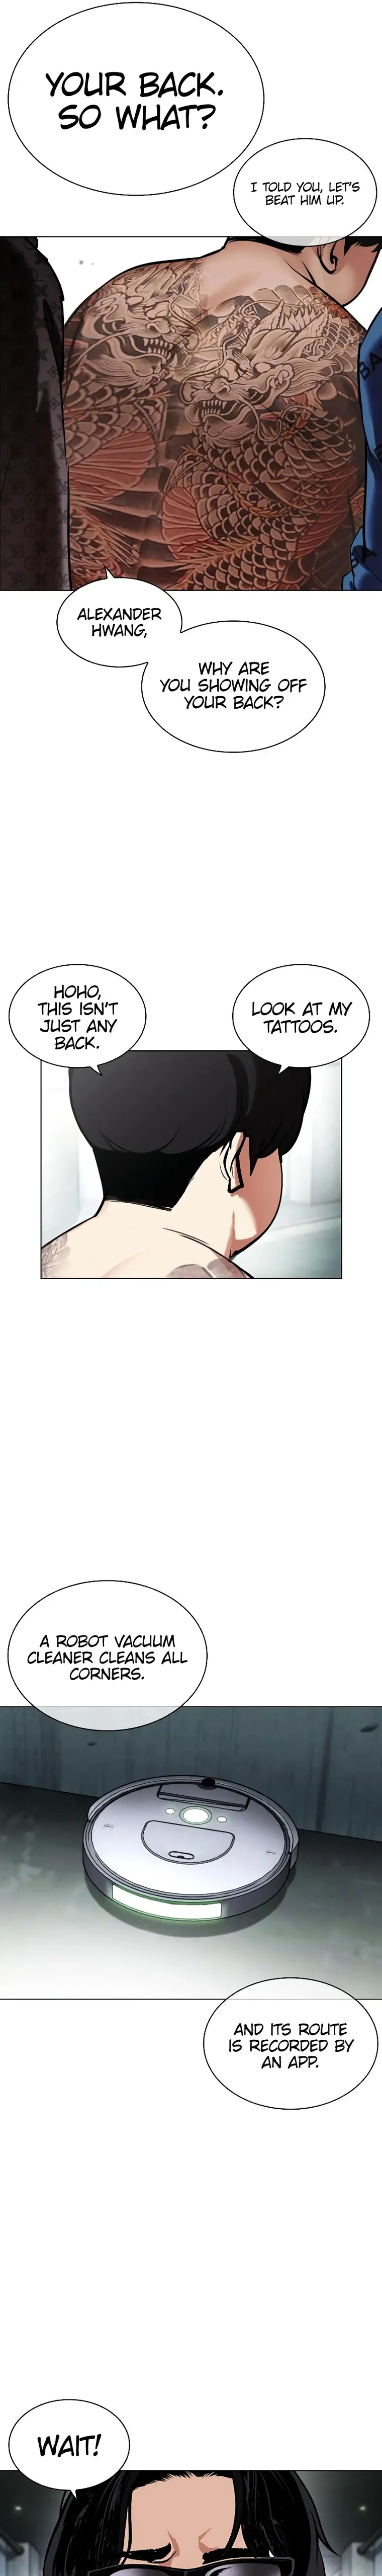 Lookism, Chapter 451